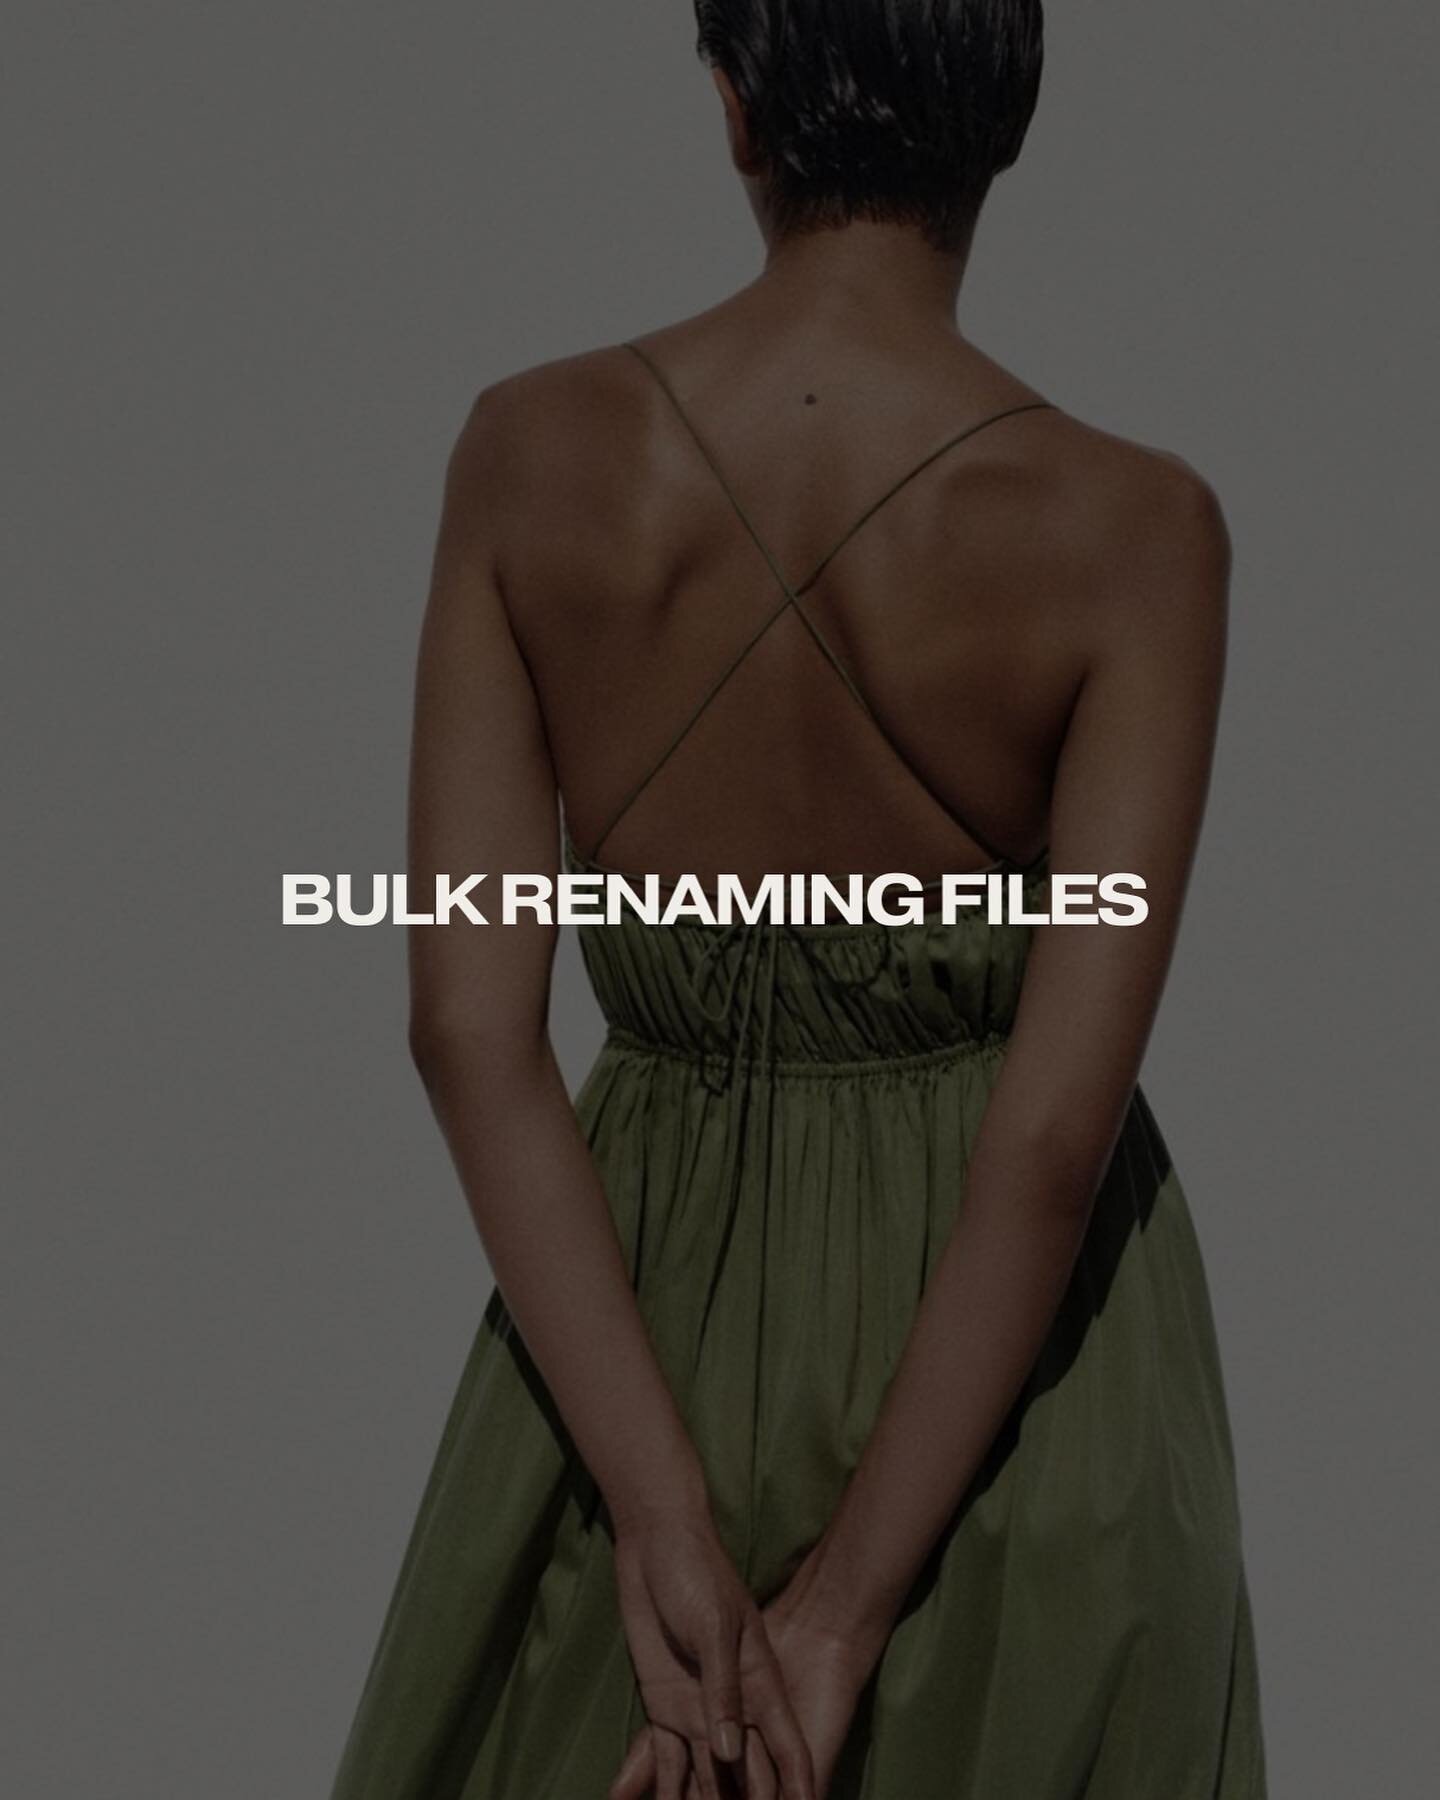 Still renaming files one by one? Sis, you&rsquo;re living in the past! 

Visit my latest blog post &lsquo;how to bulk rename files on a Mac - in less than 10 seconds&rsquo; to learn a quick new method that is bound to impress your clients, web dev or